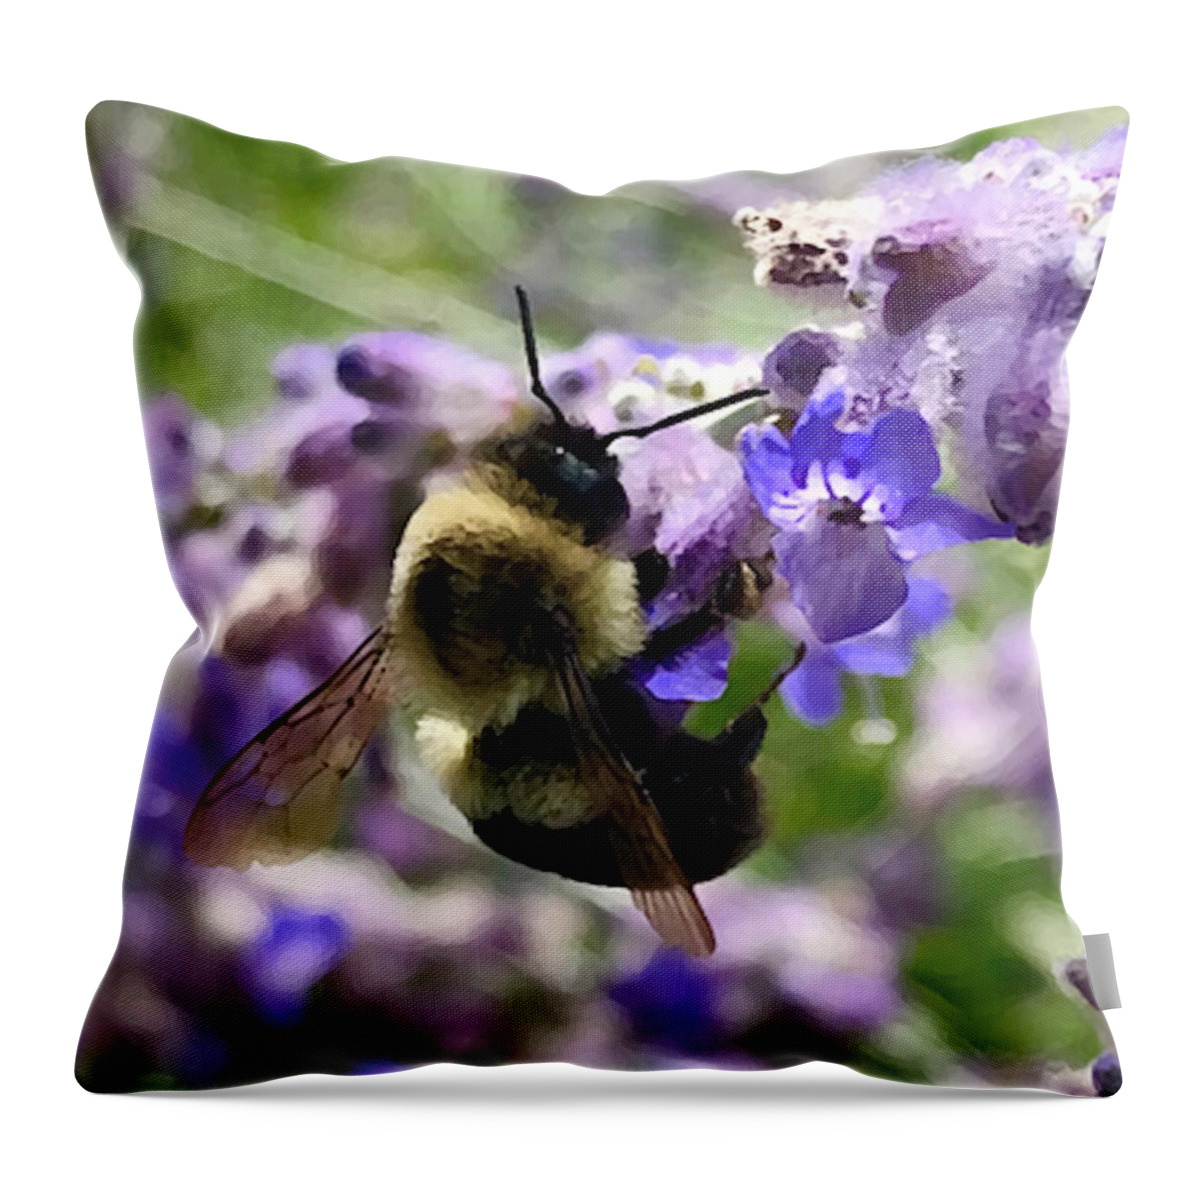 Bumblebee Throw Pillow featuring the photograph Pollinator by Tom Johnson